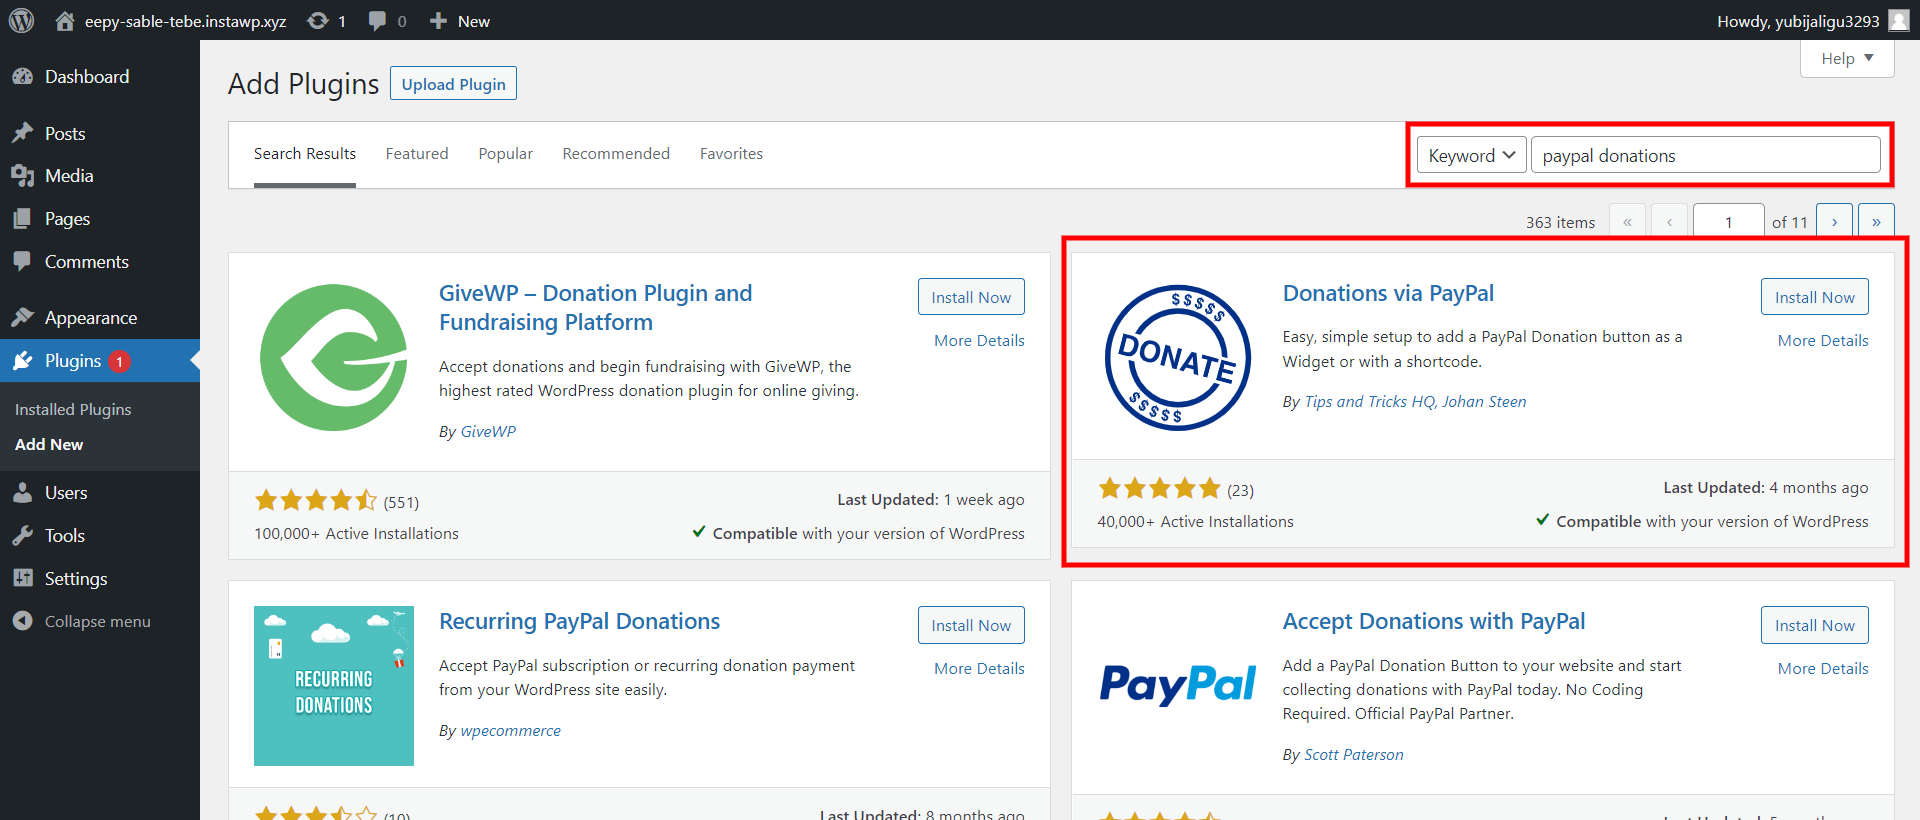 PayPal Donate Button in WordPress - download the plugin - wordpress paypal donation